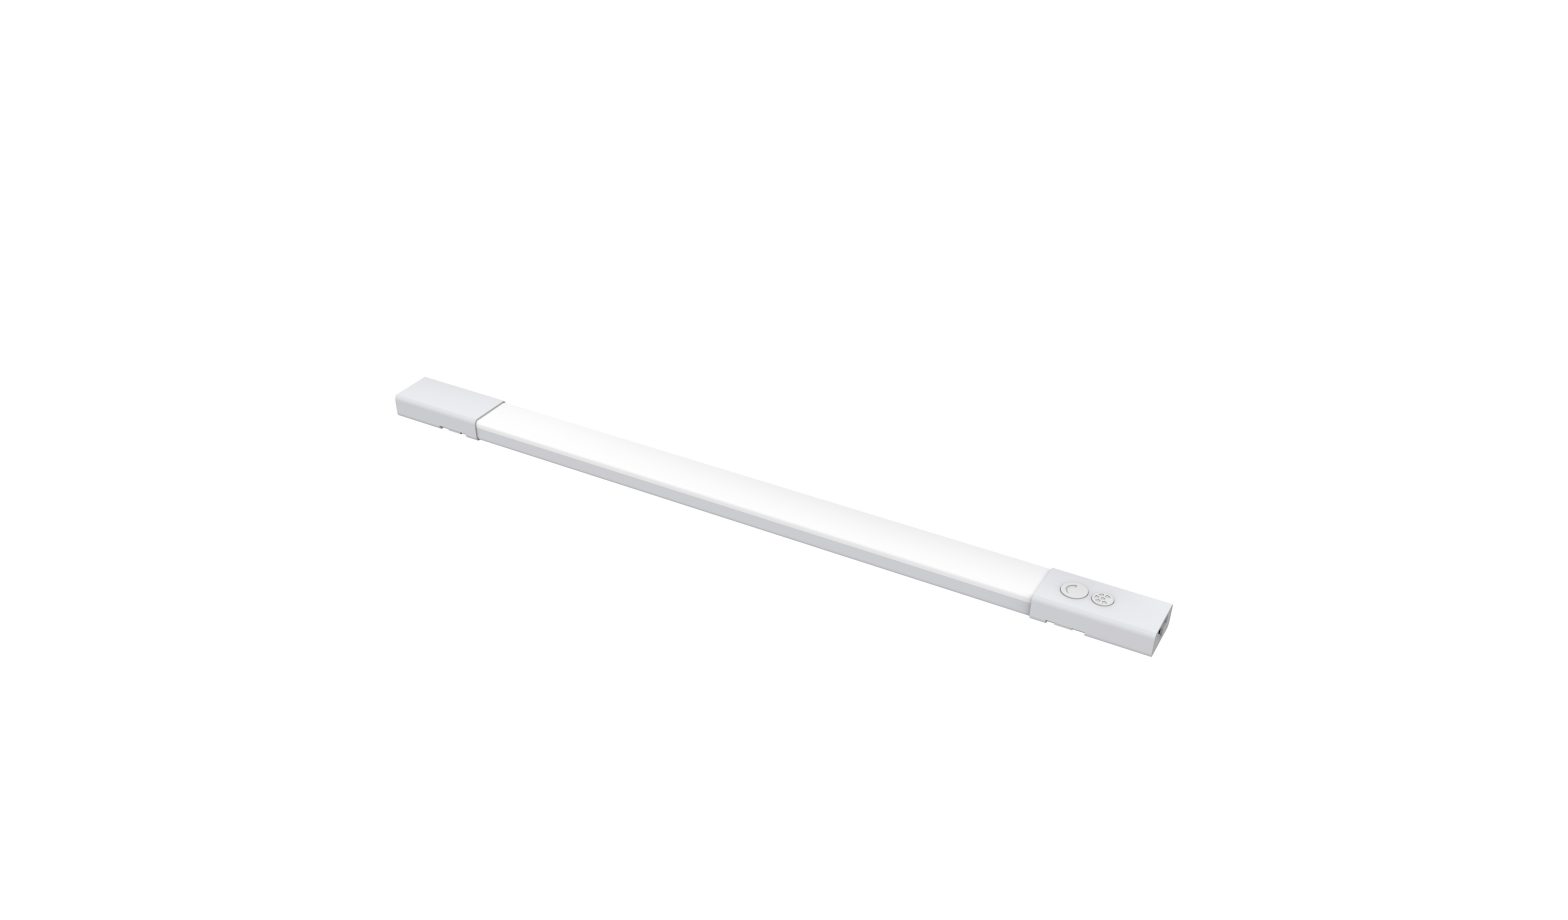 FEIT Electric UCL24/5CCT 24 inch Under Cabinet Light Installation Guide